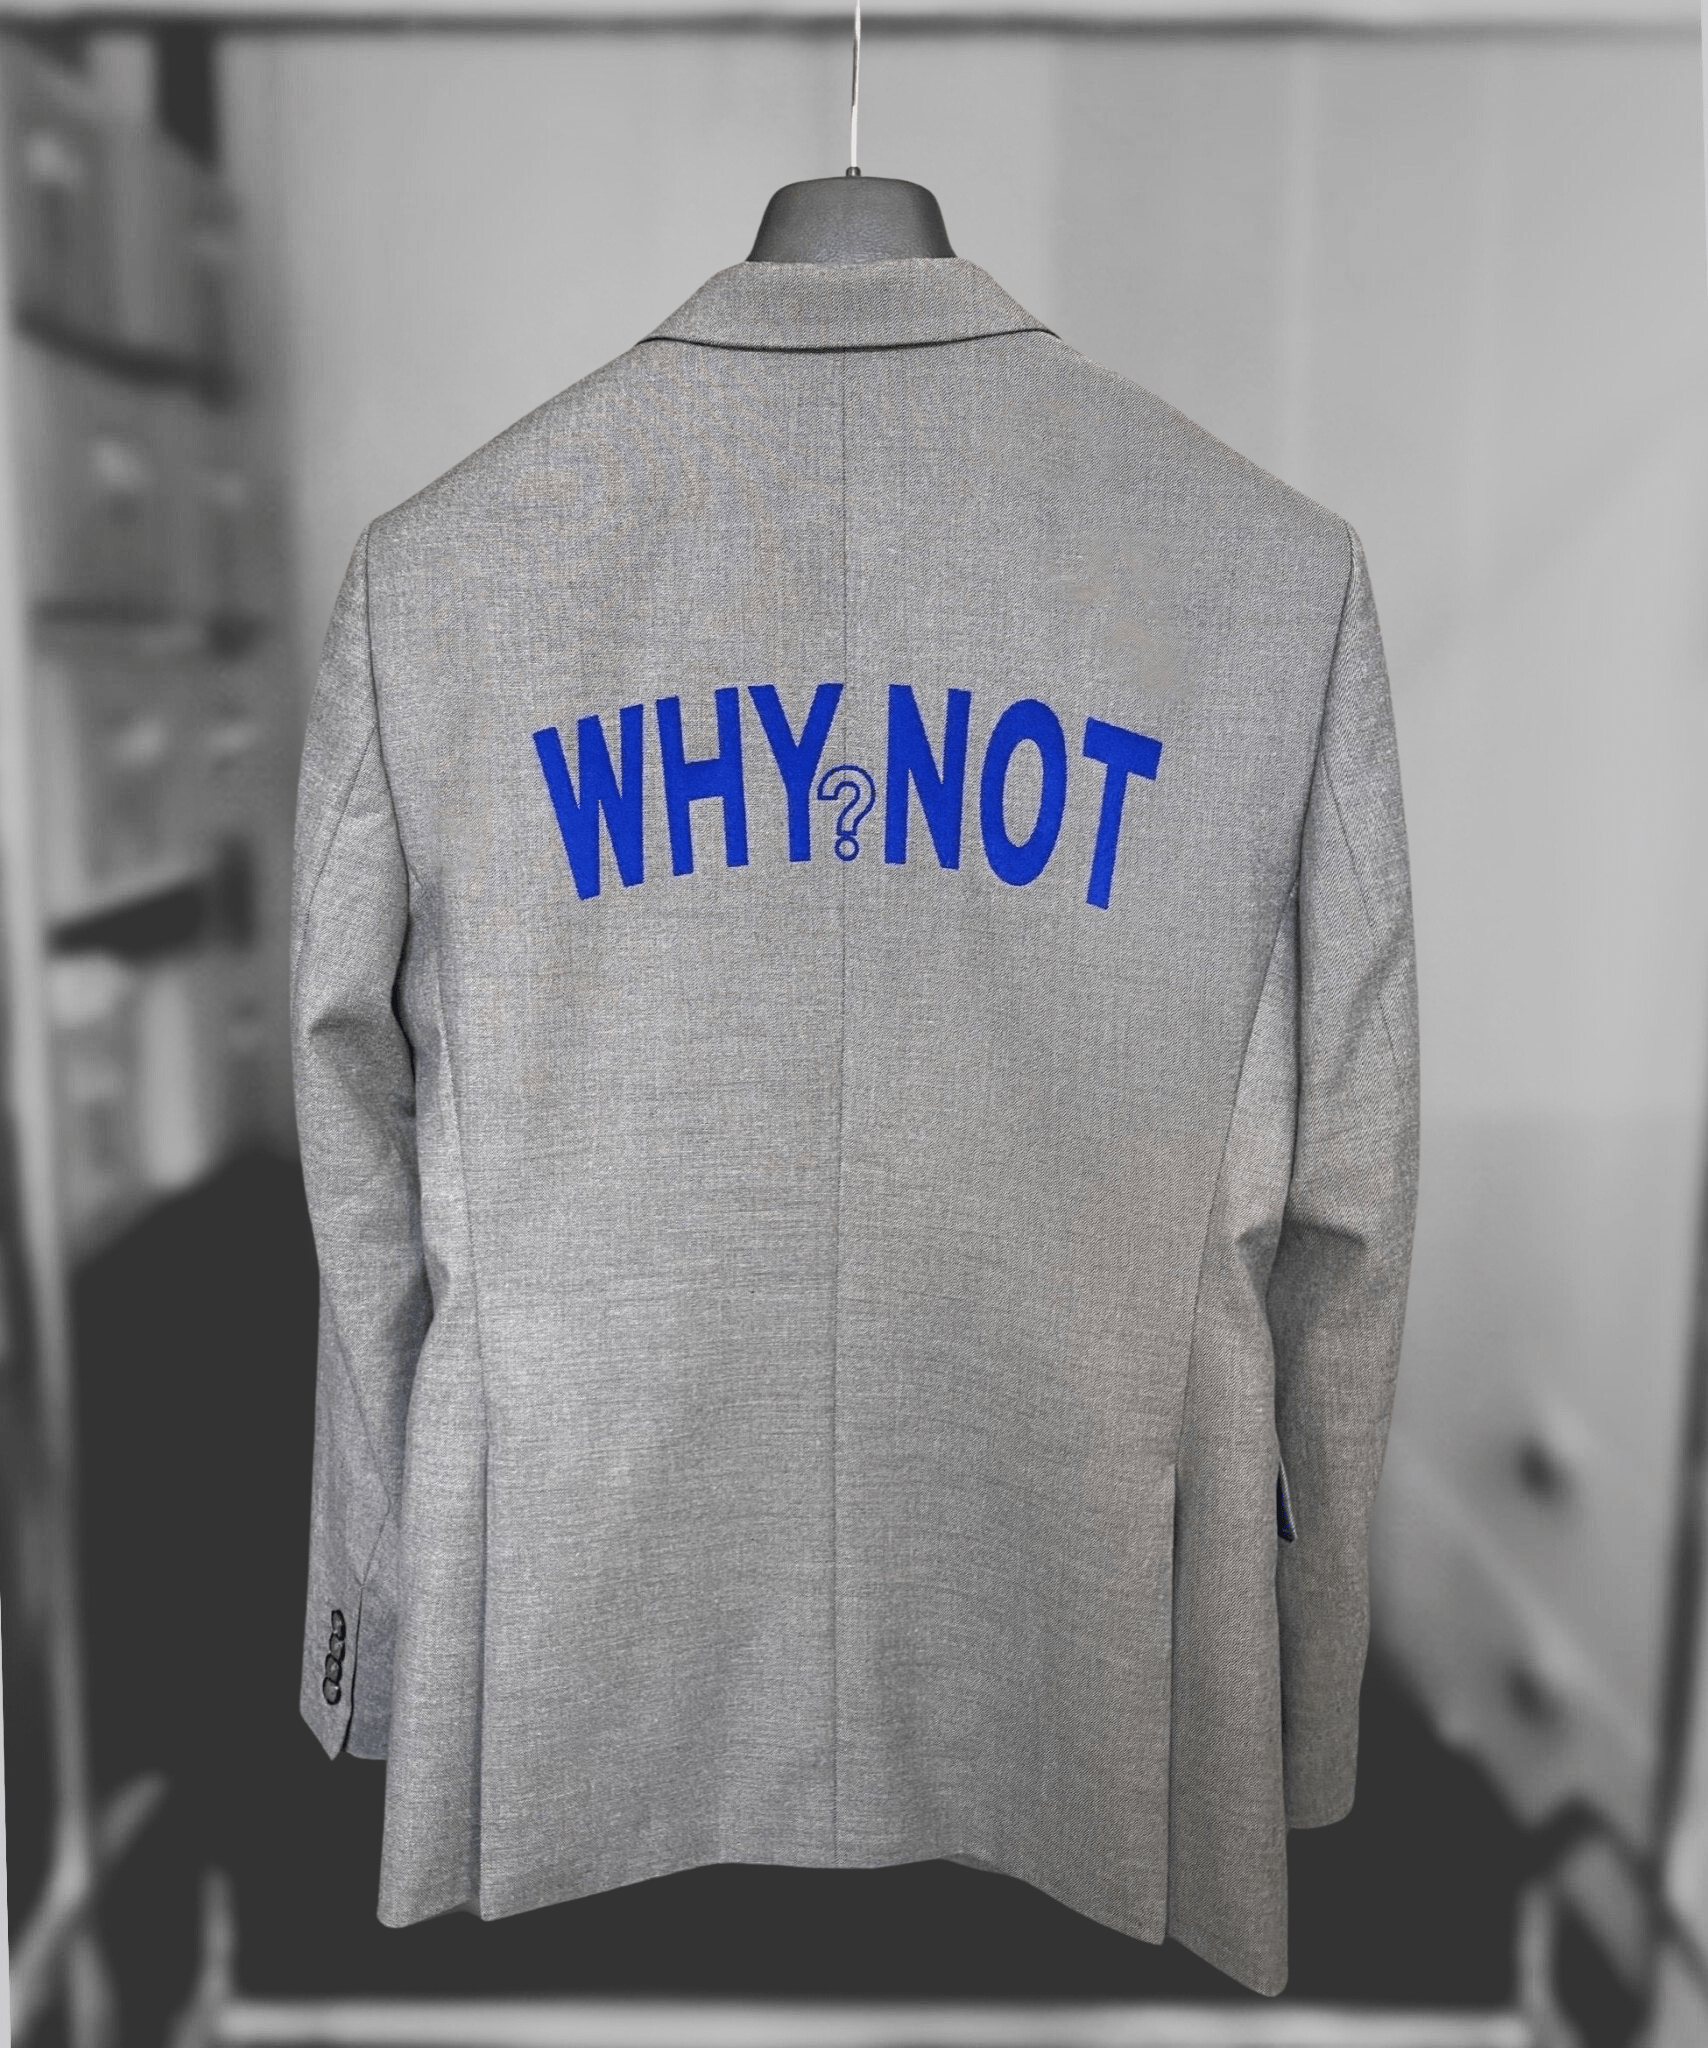 WHY NOT? Upcycled Blazer - OBLIVIOUS?